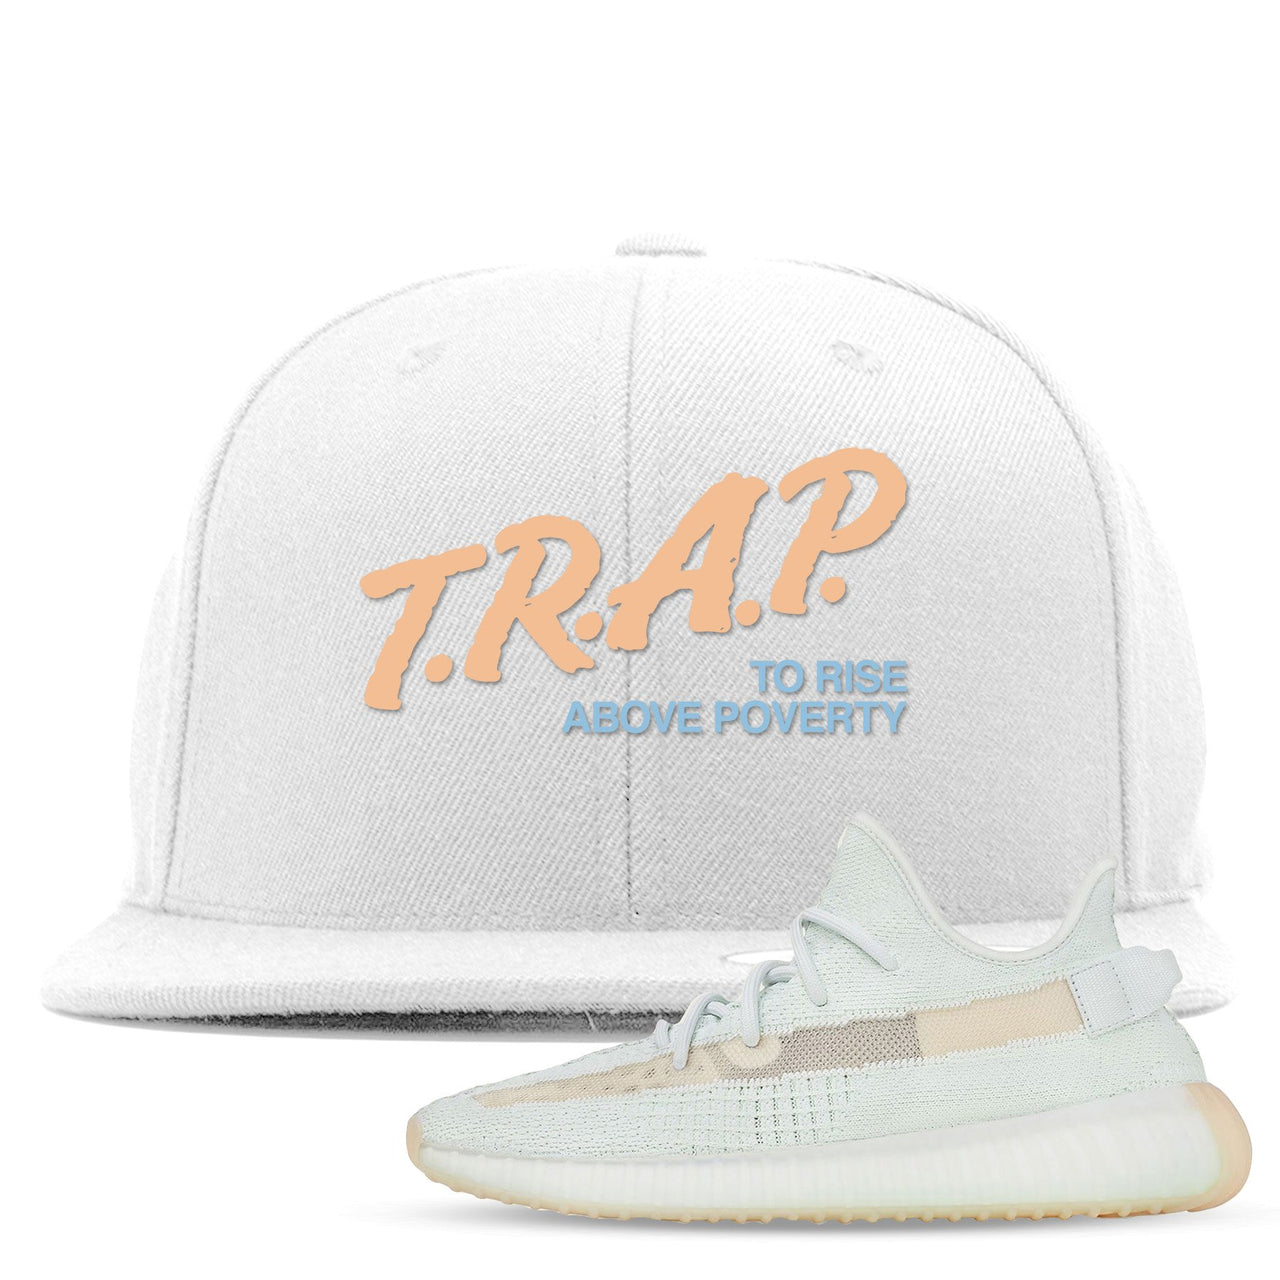 Hyperspace 350s Snapback | Trap To Rise Above Poverty, White